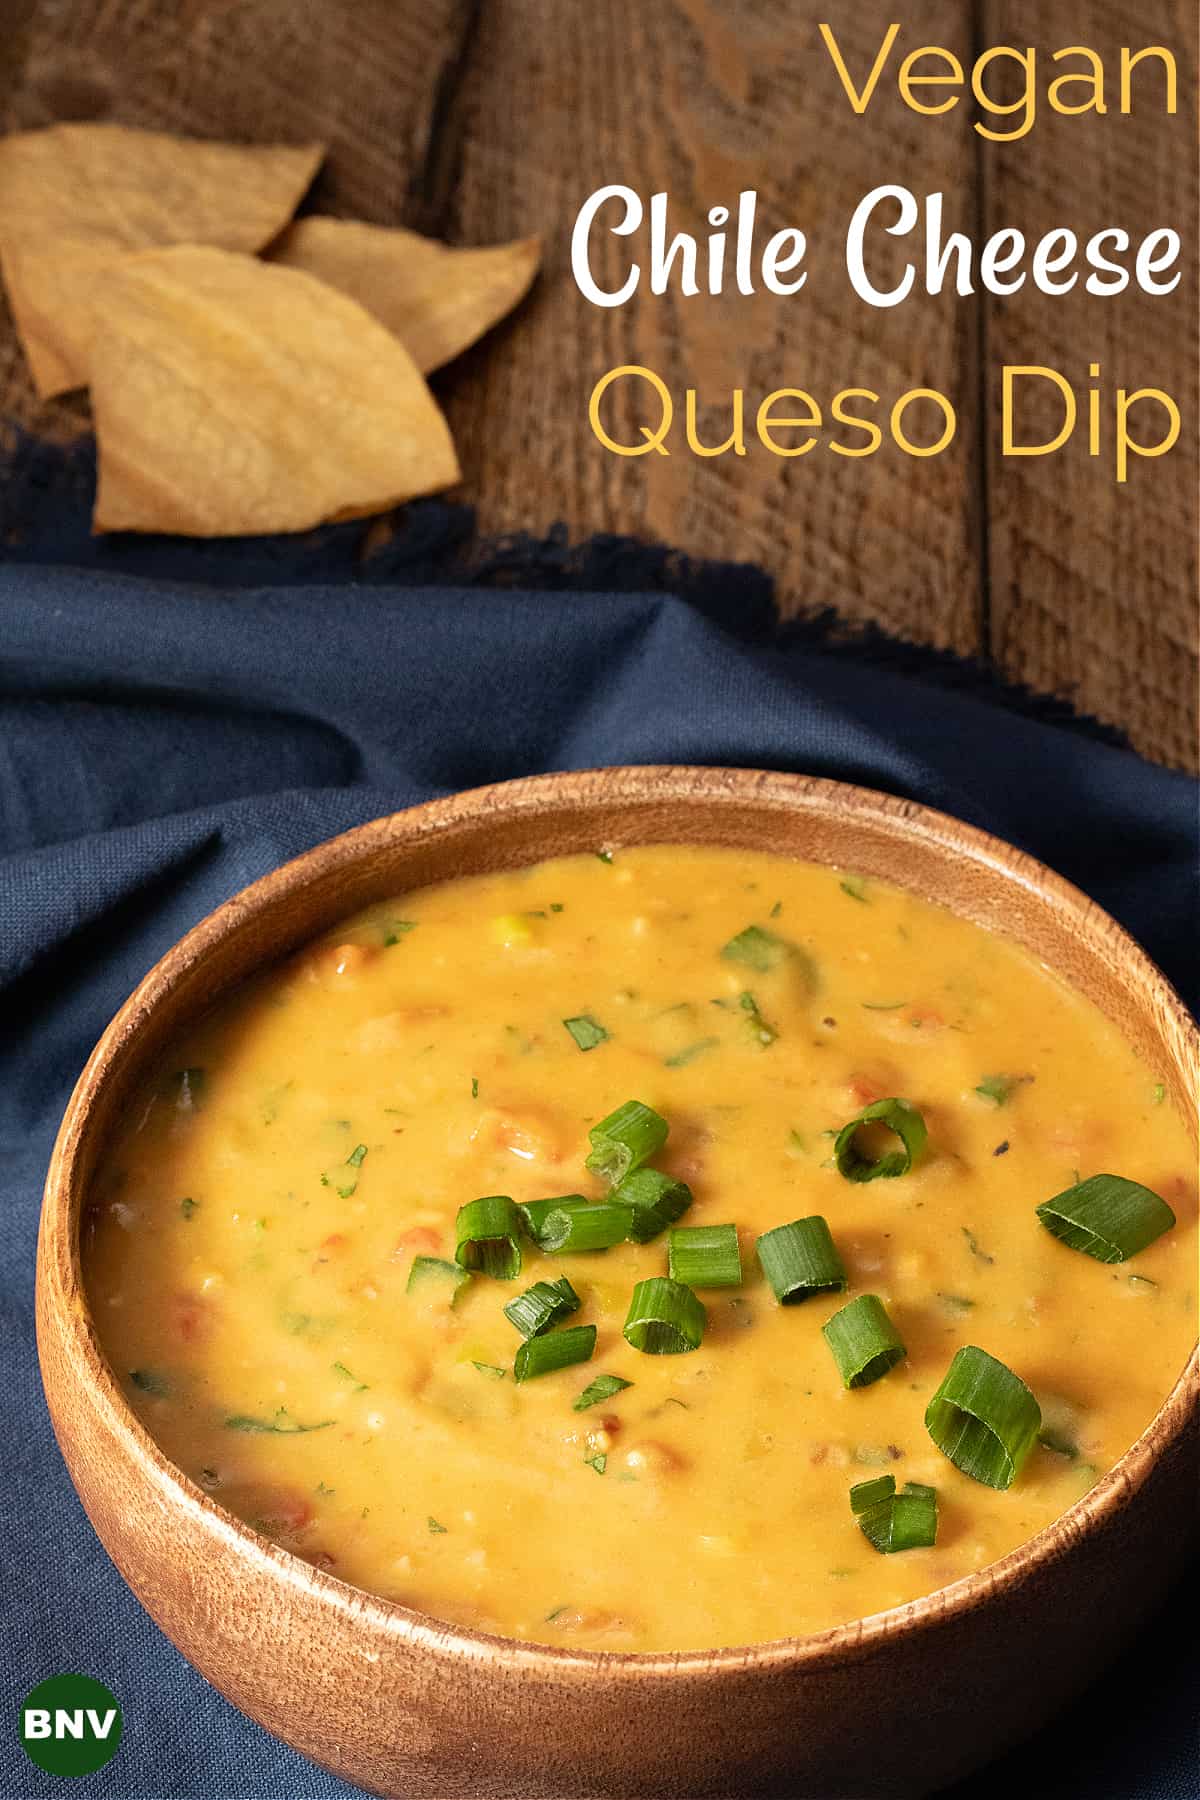 bowl of vegan chile cheese dip and chips